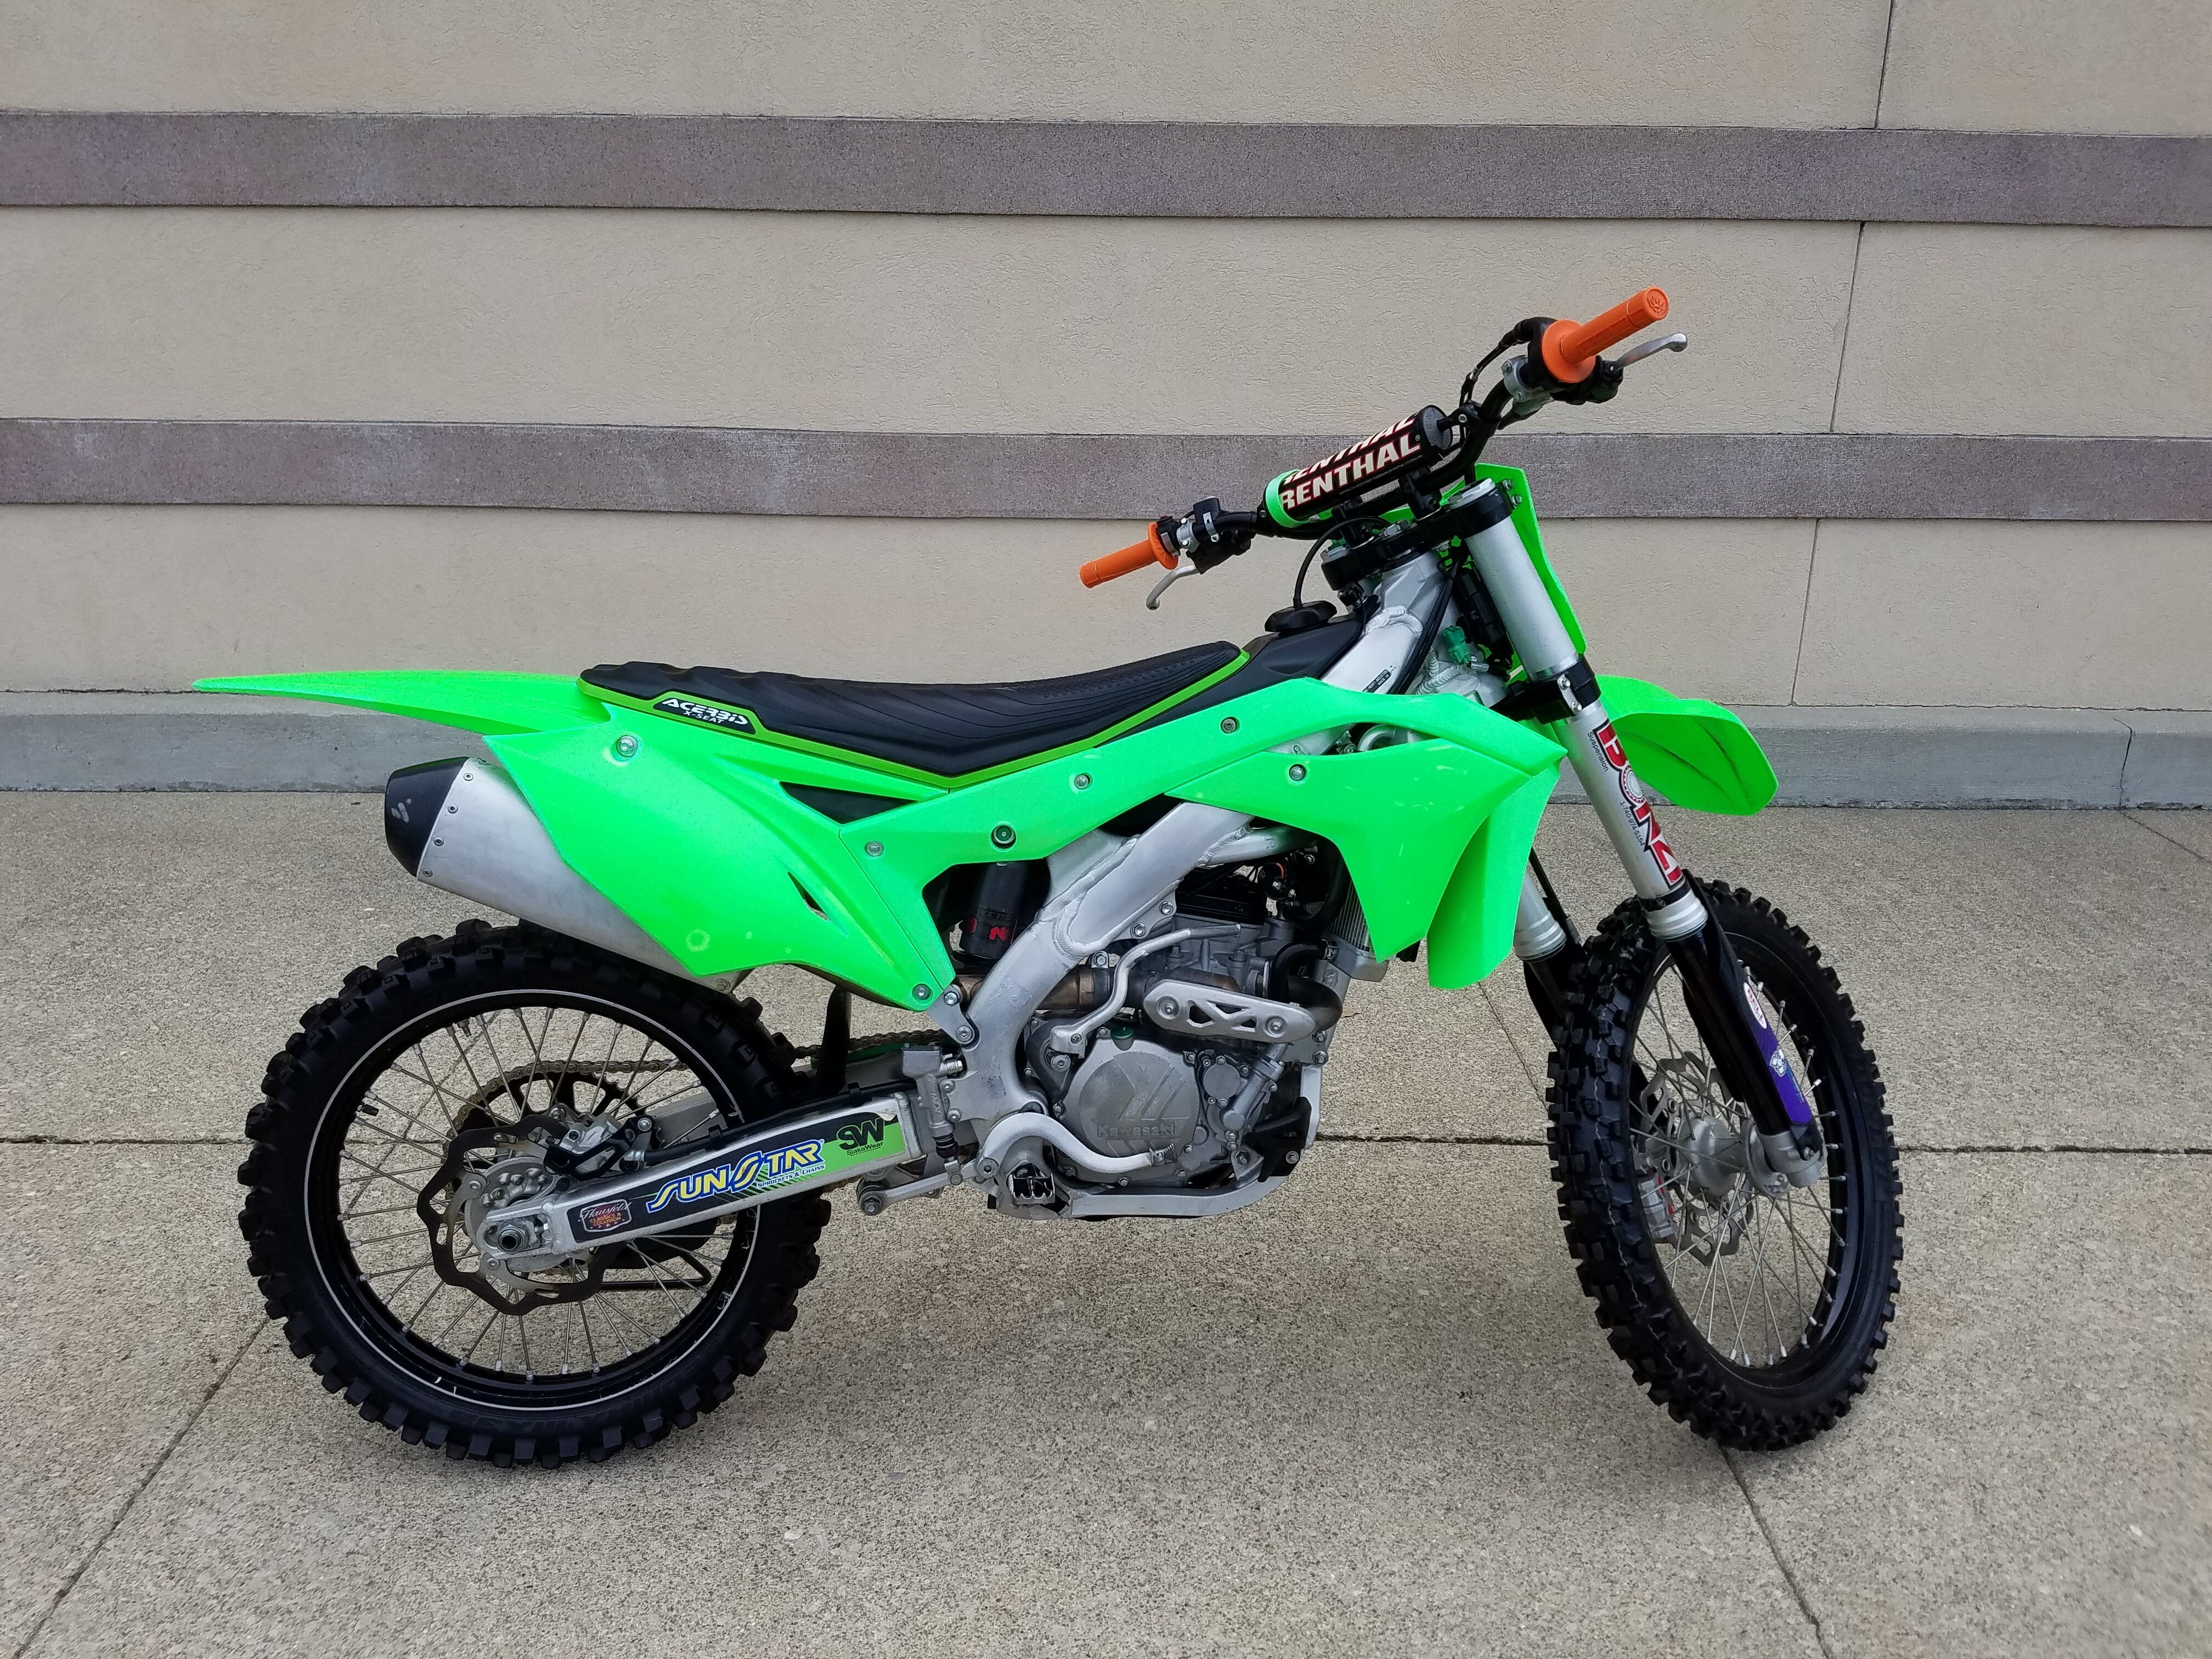 2017 Kawasaki KX250F Motorcycles for Sale - Motorcycles on ...